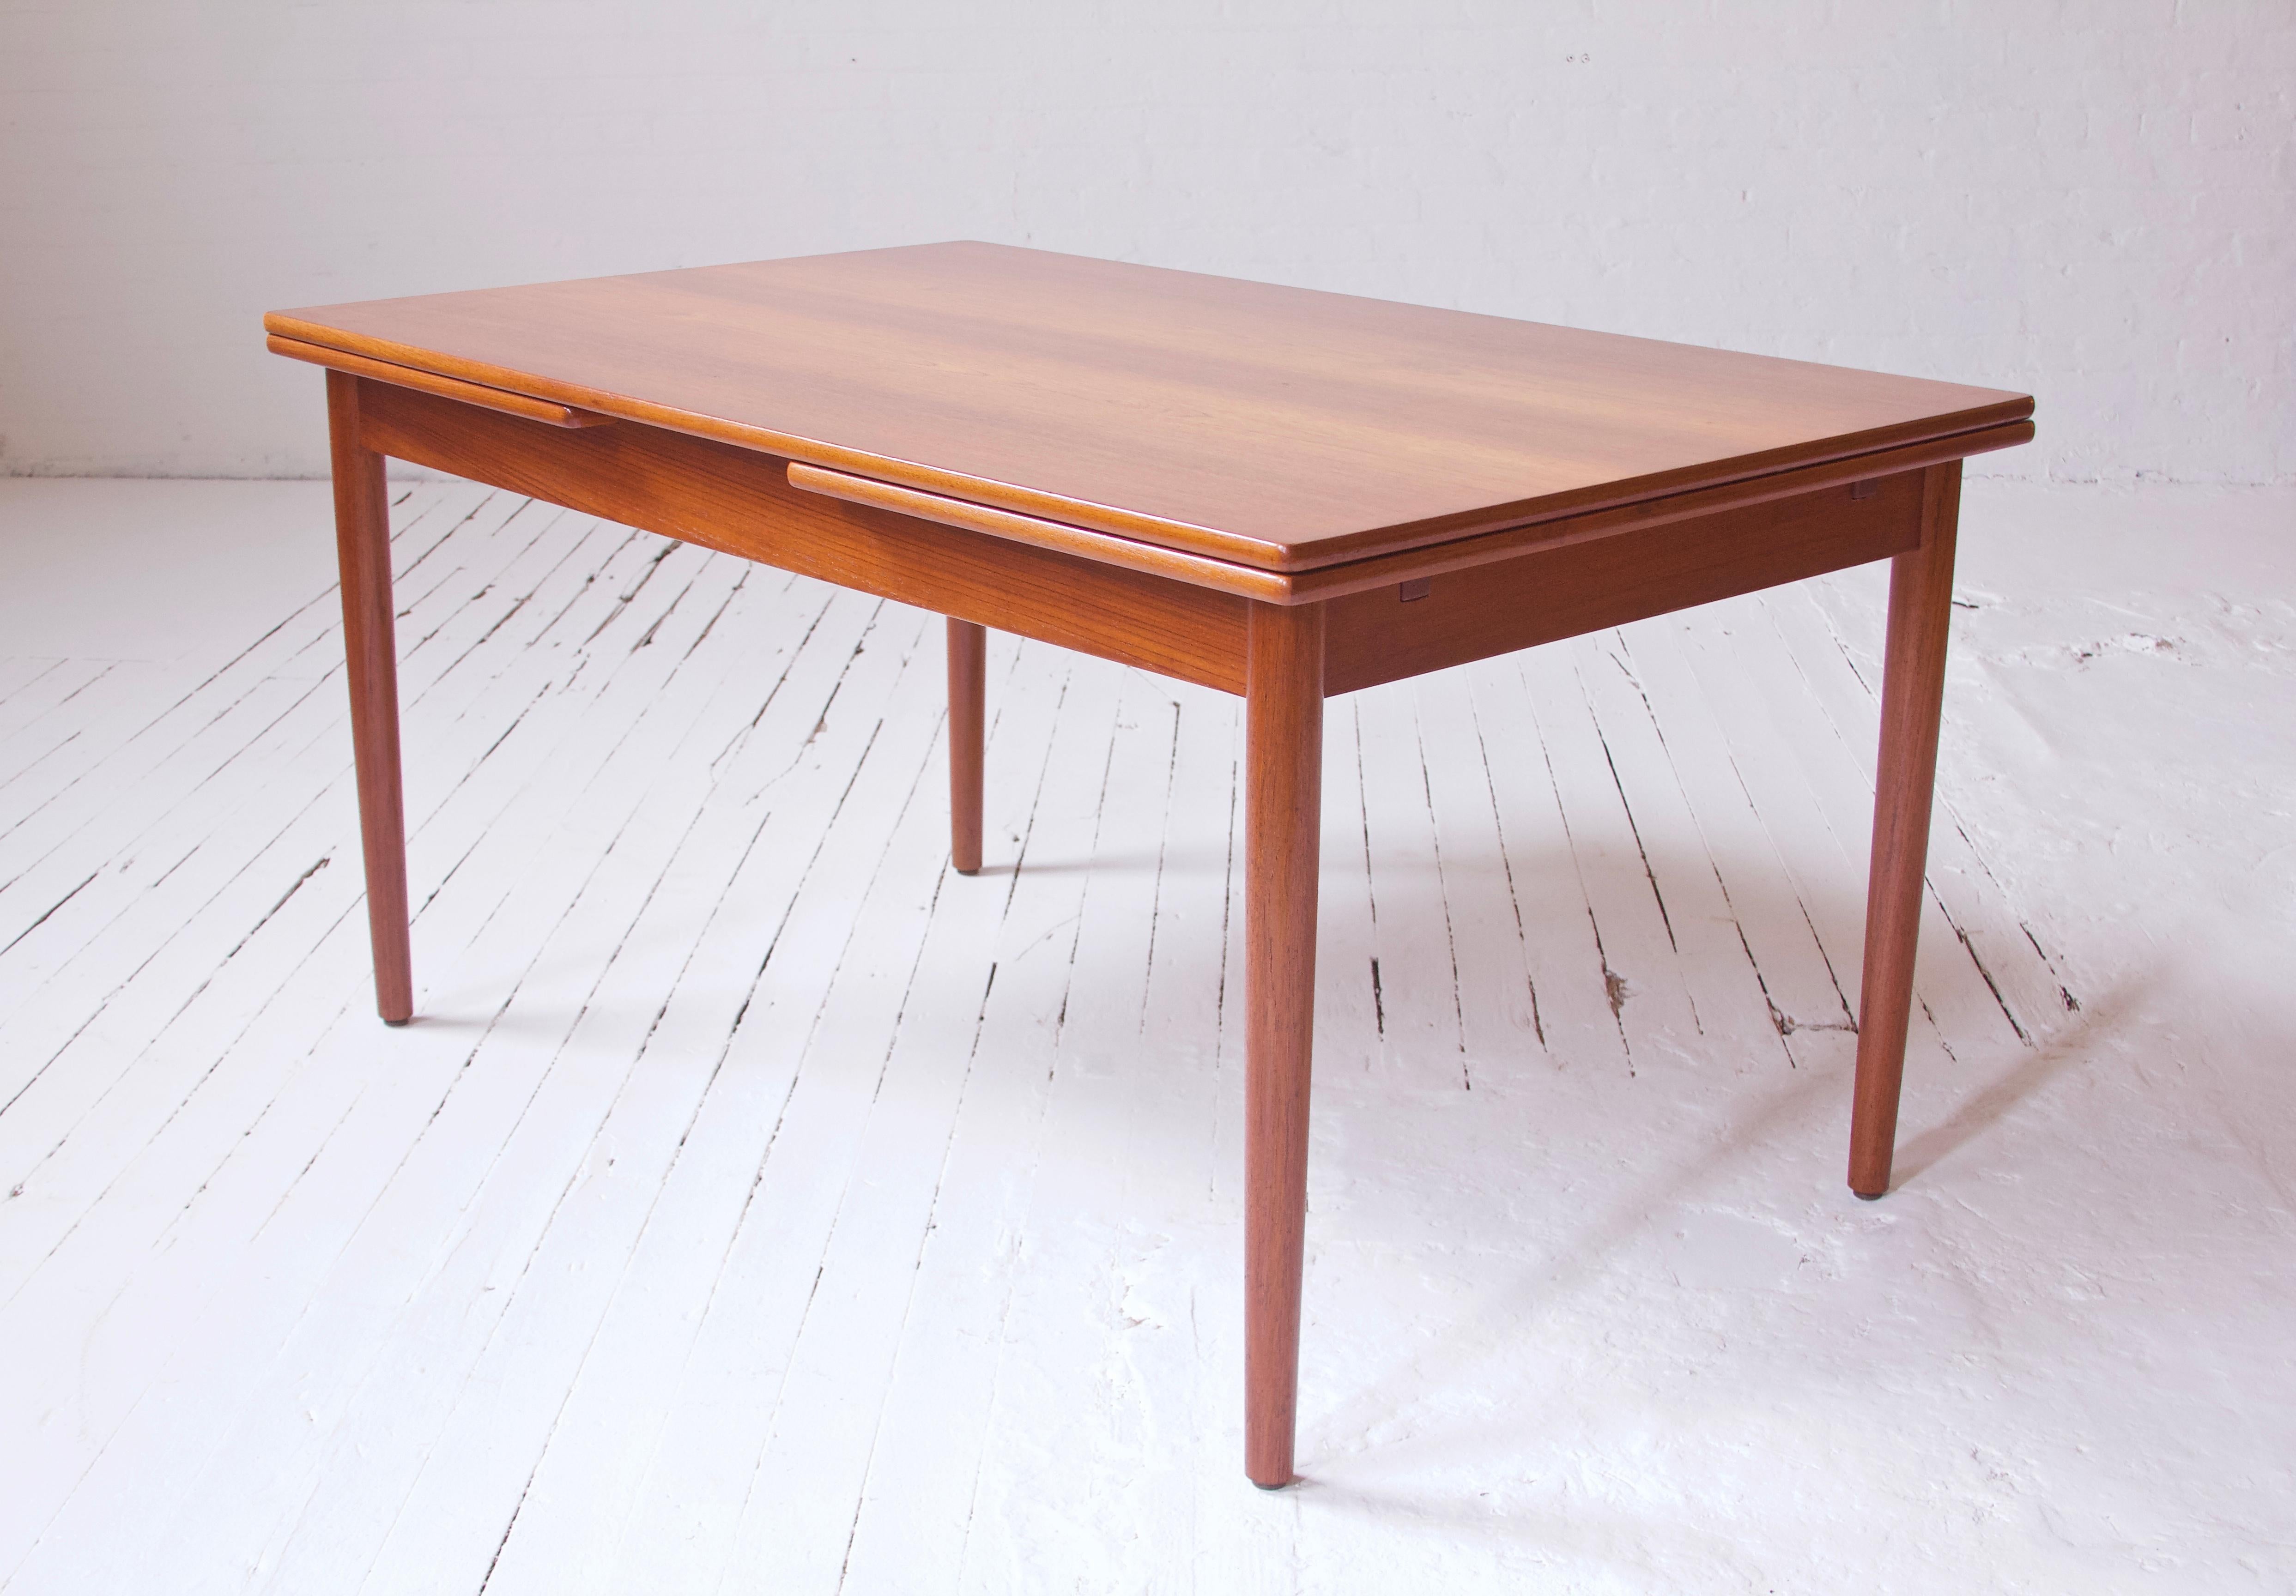 Rare Vintage AT-316 Hans J. Wegner extension dining table in teak, 1960. An attractive and ingeniously designed extension table designed by Wegner for Andreas Tuck, circa 1960. 

Featuring solid wood, tapered extension leaf slides, this table's